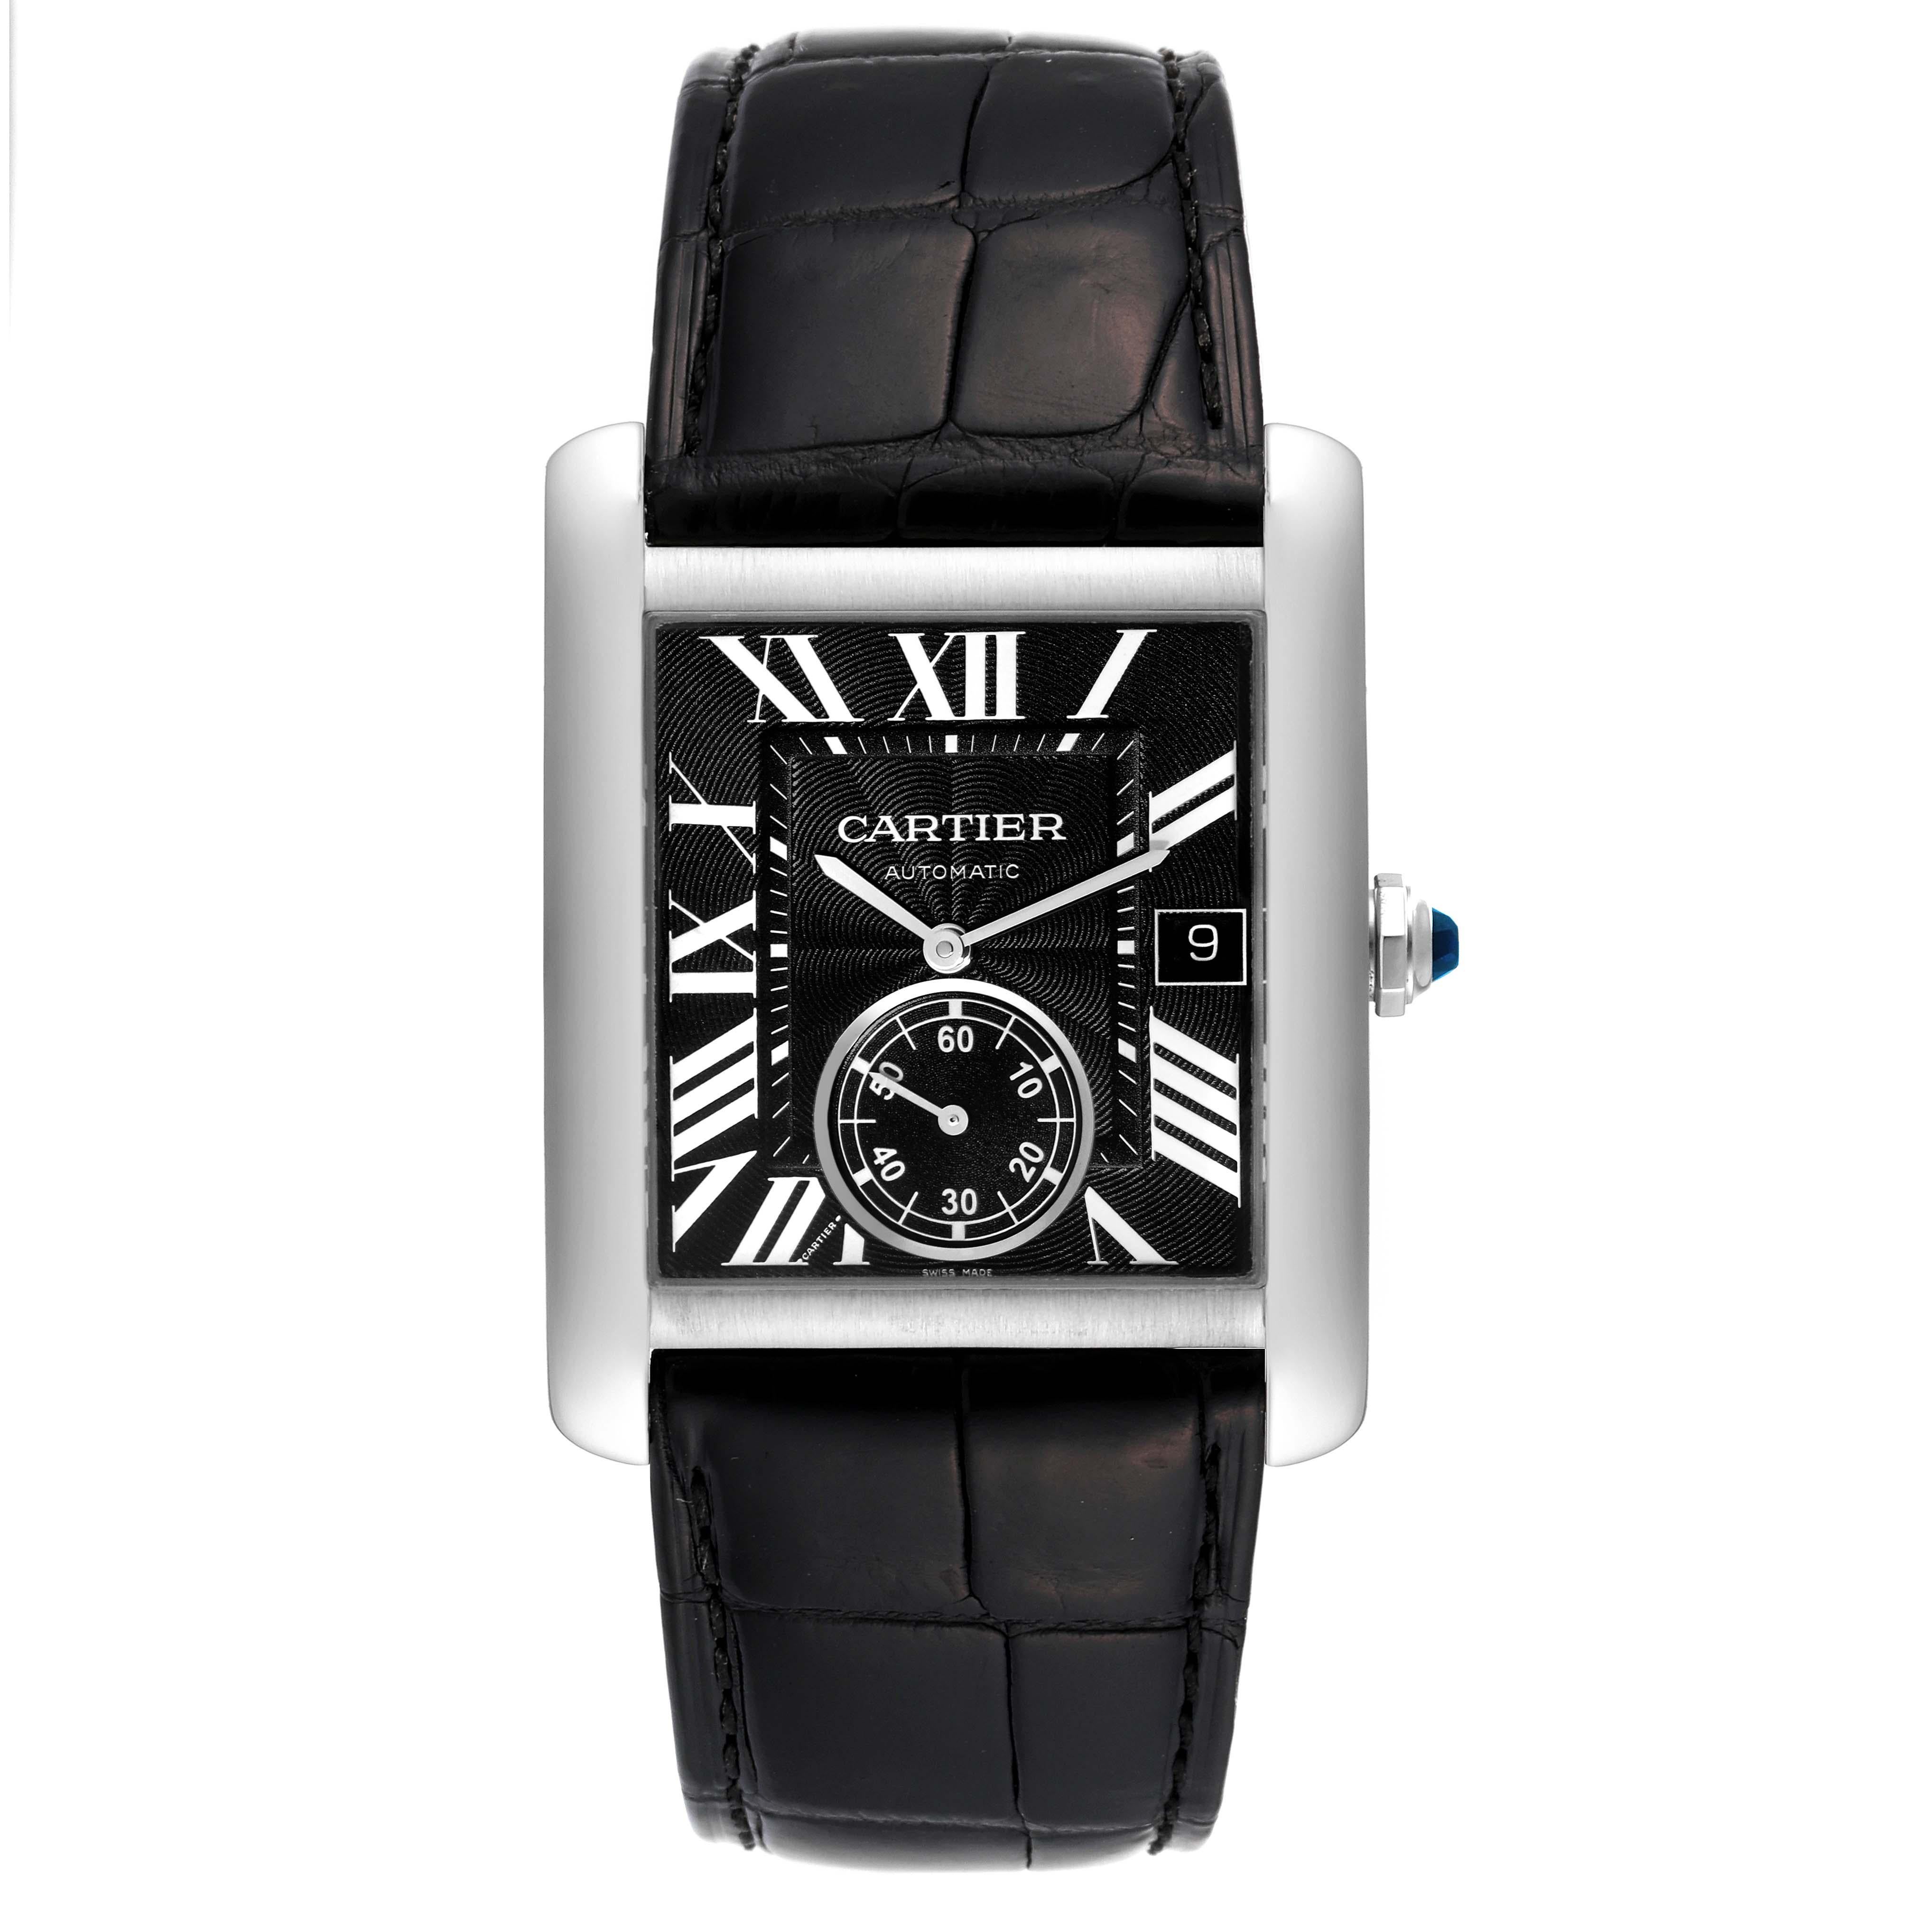 Cartier Tank MC Black Dial Automatic Steel Mens Watch W5330004 Card. Automatic self-winding movement. Brushed stainless steel case 34.3 x 44.0 mm. Protected octagonal crown set with the faceted blue spinel. Exhibition transparent sapphire crystal